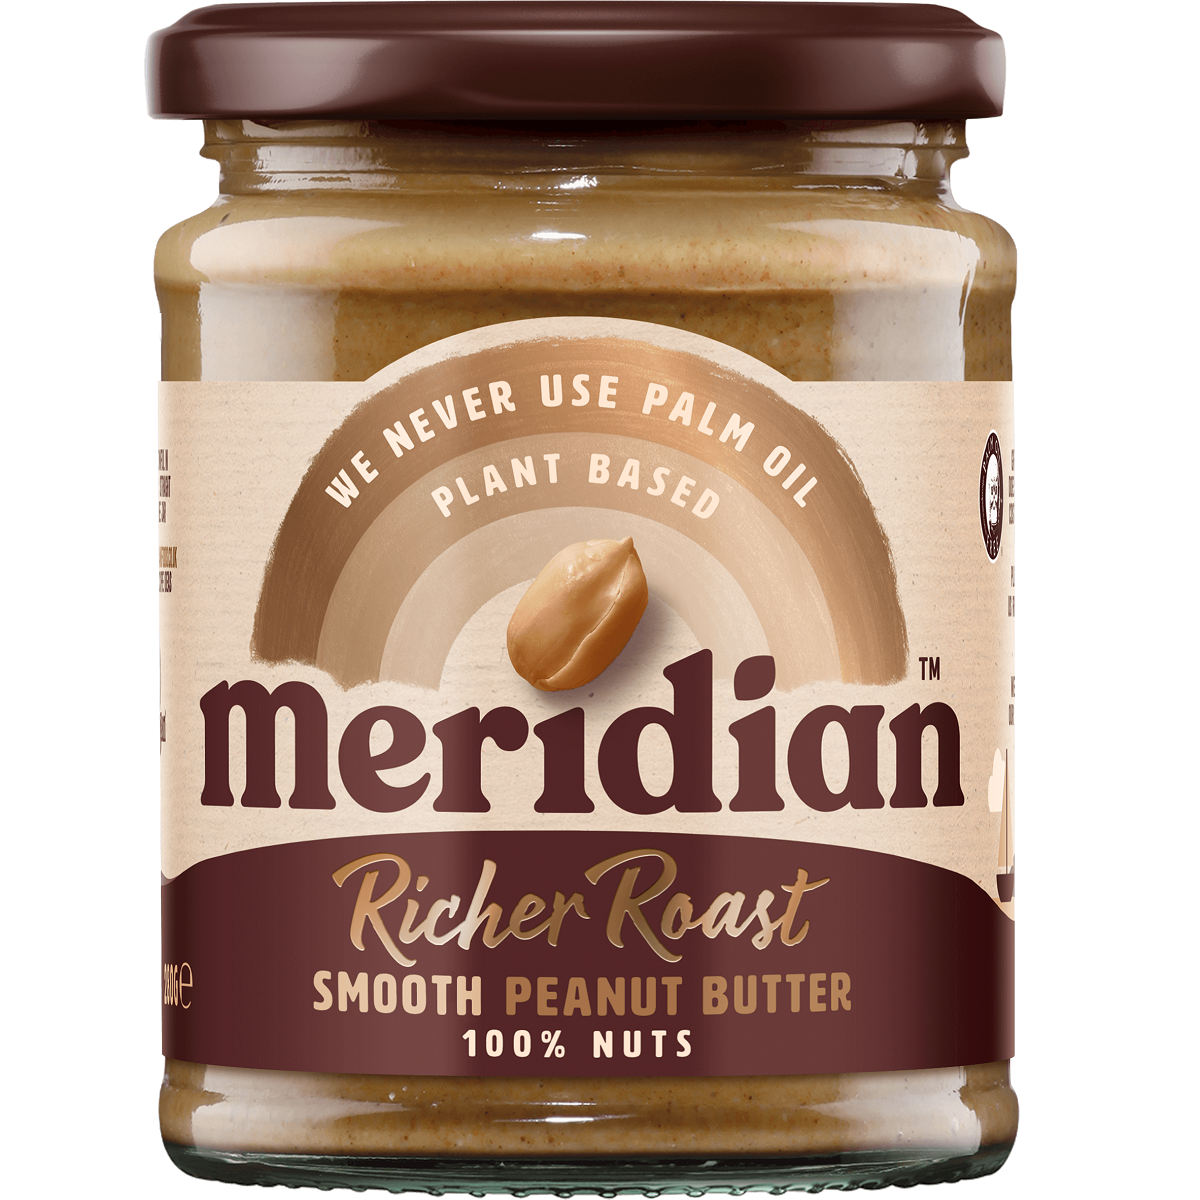 Meridian Smooth Peanut Butter 280g